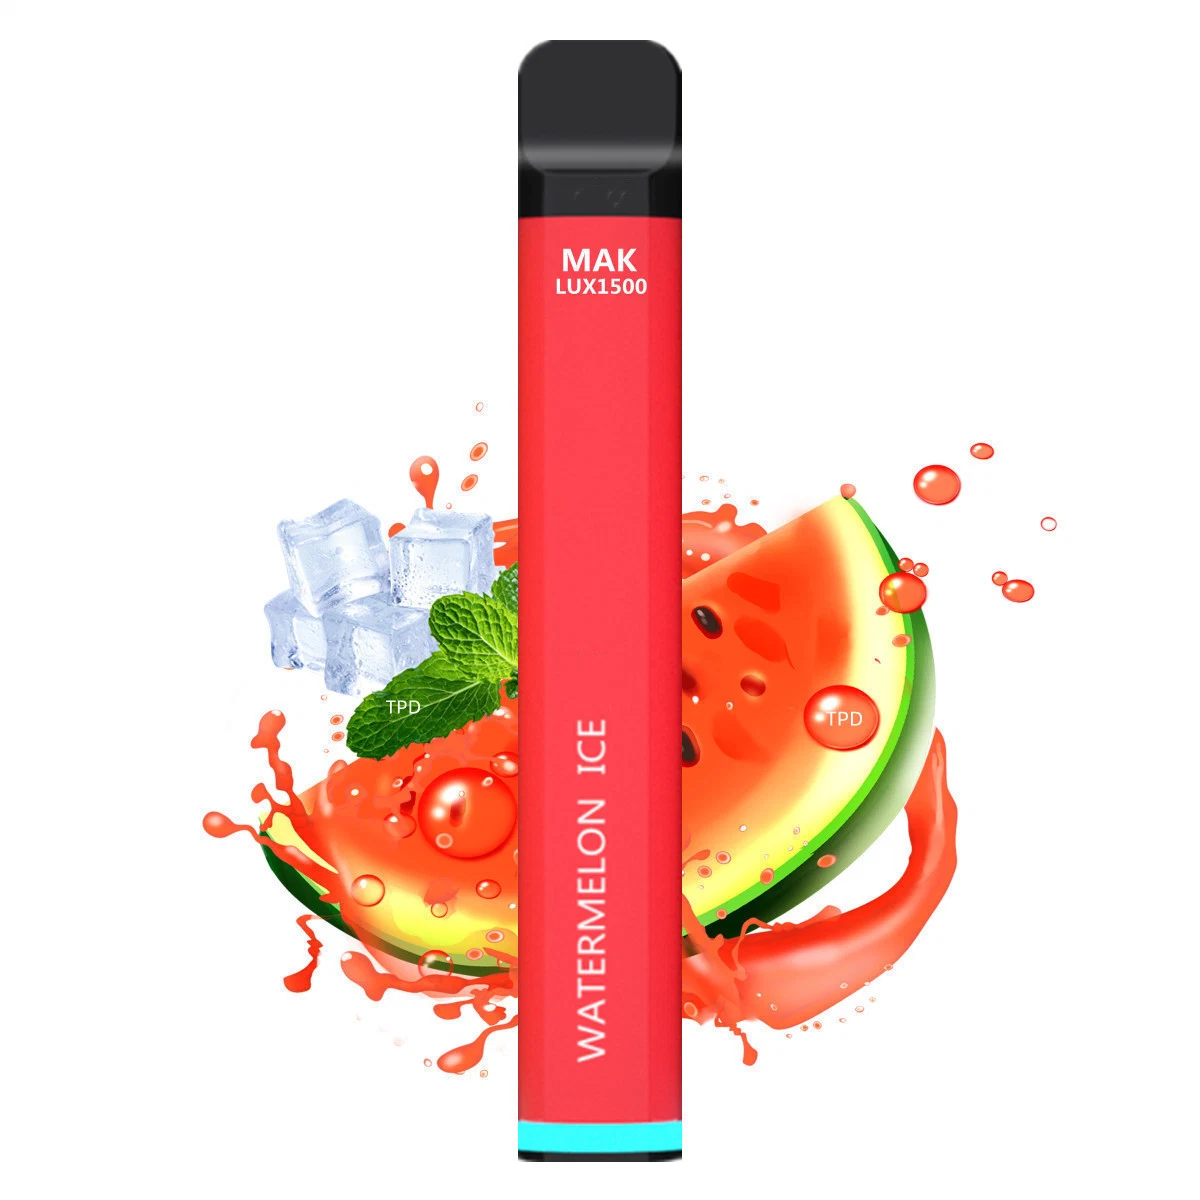 Mak Lux 600 800 1500 Puffs 5000puffs Nicotine Free 0% 2% 5% E Cigarette Mak Disposable/Chargeable Vape